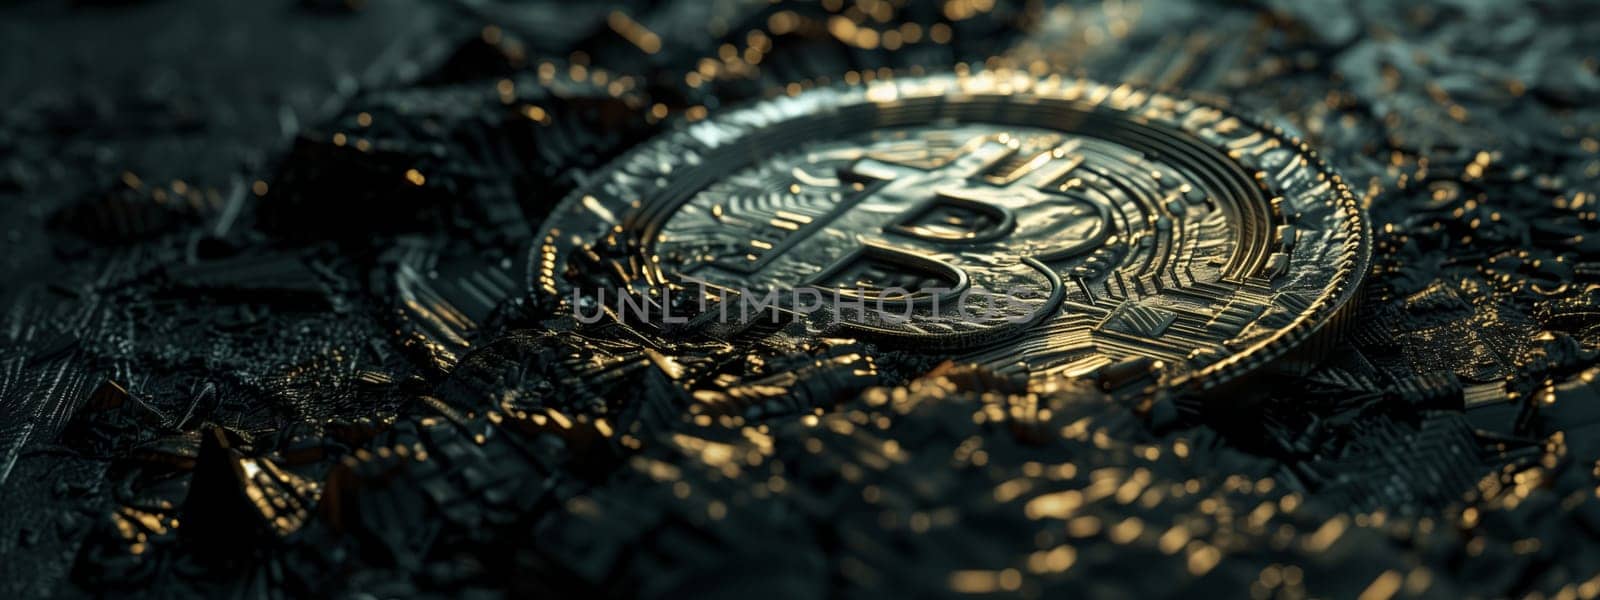 Detailed closeup image of a coin on a dark surface by richwolf